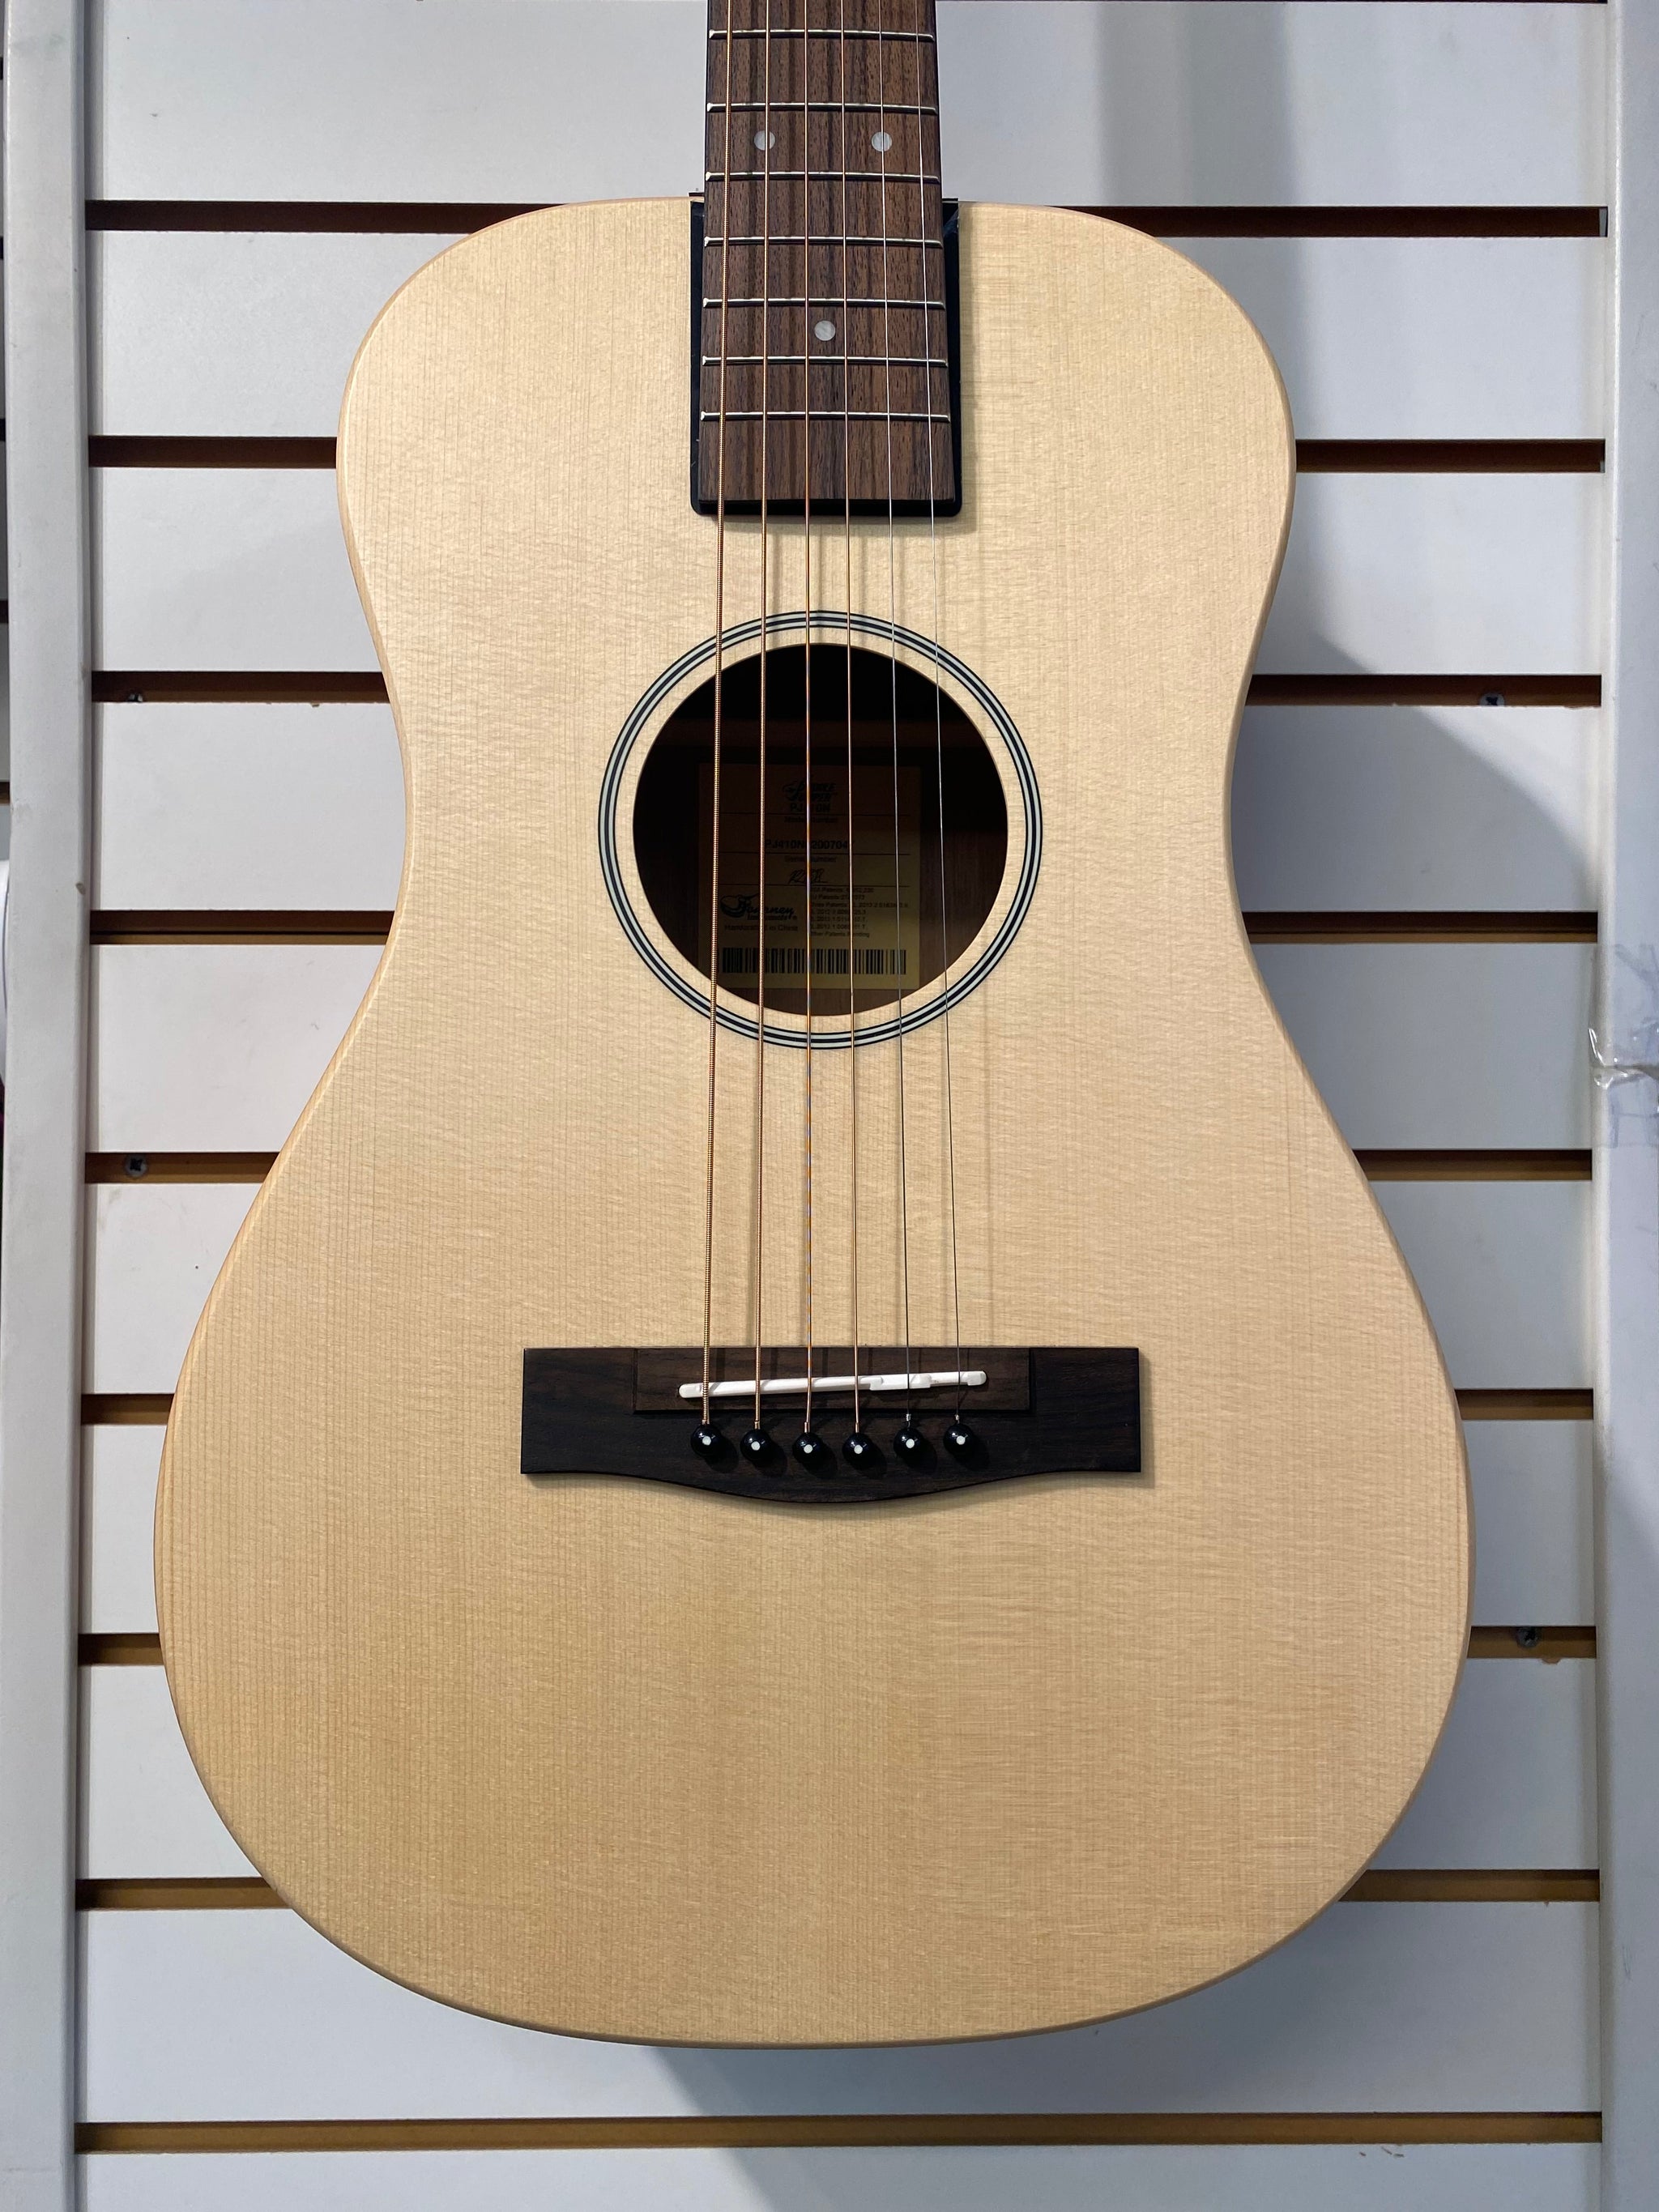 Acoustic Guitars - Grass Roots Music Store